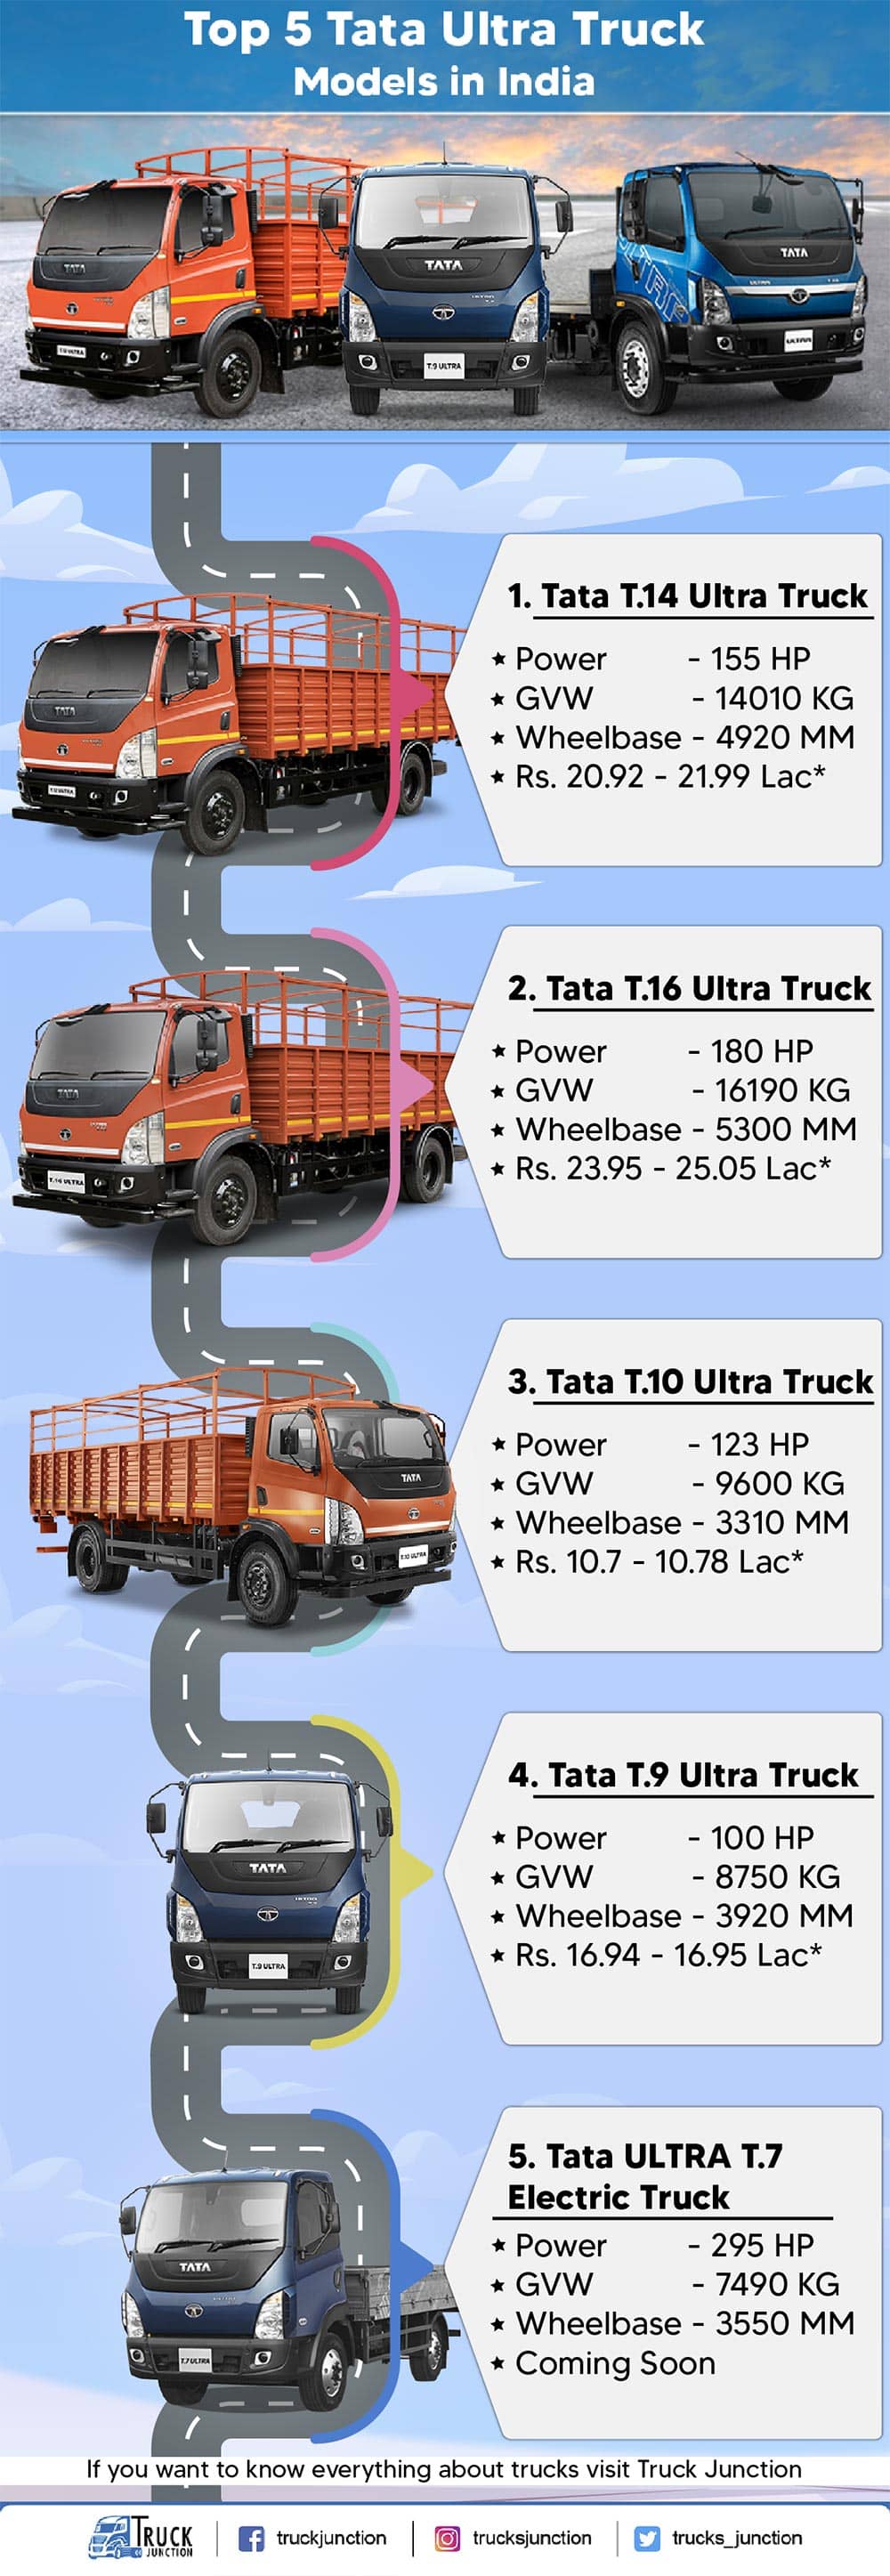 Top 5 Tata Ultra Truck Models in India infographic